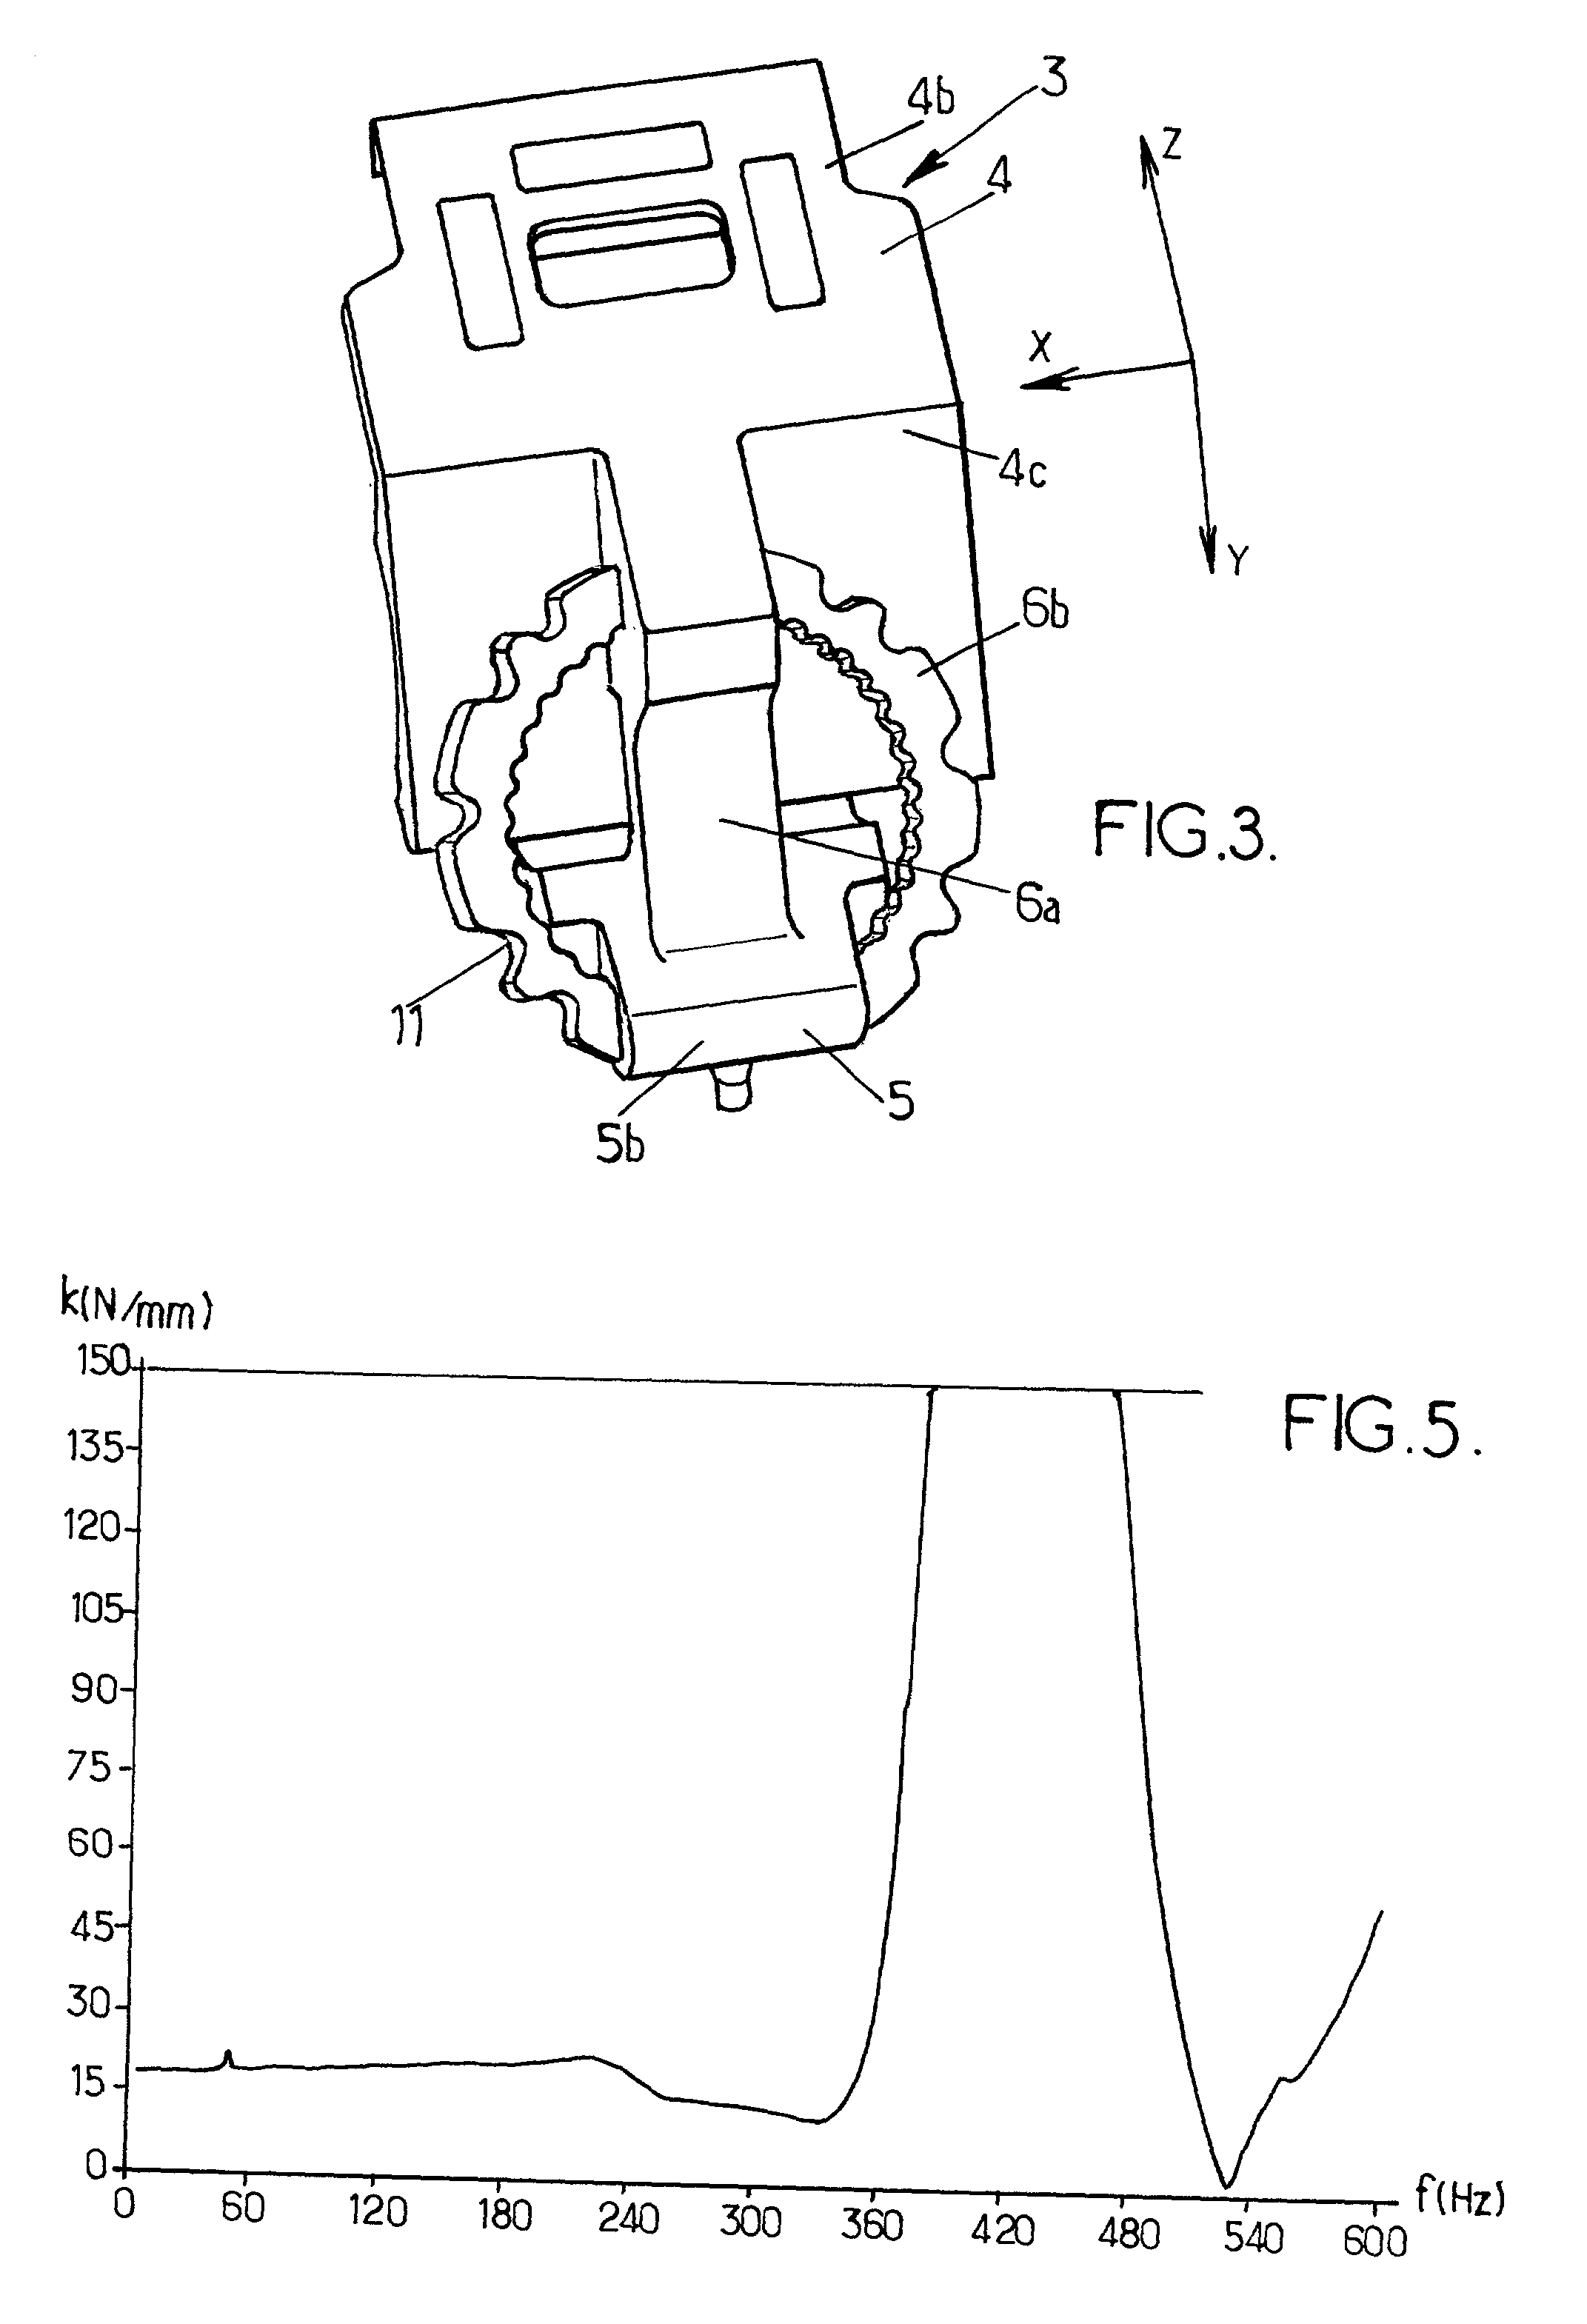 Suspension fitting for a motor vehicle exhaust system, and a vehicle fitted therewith